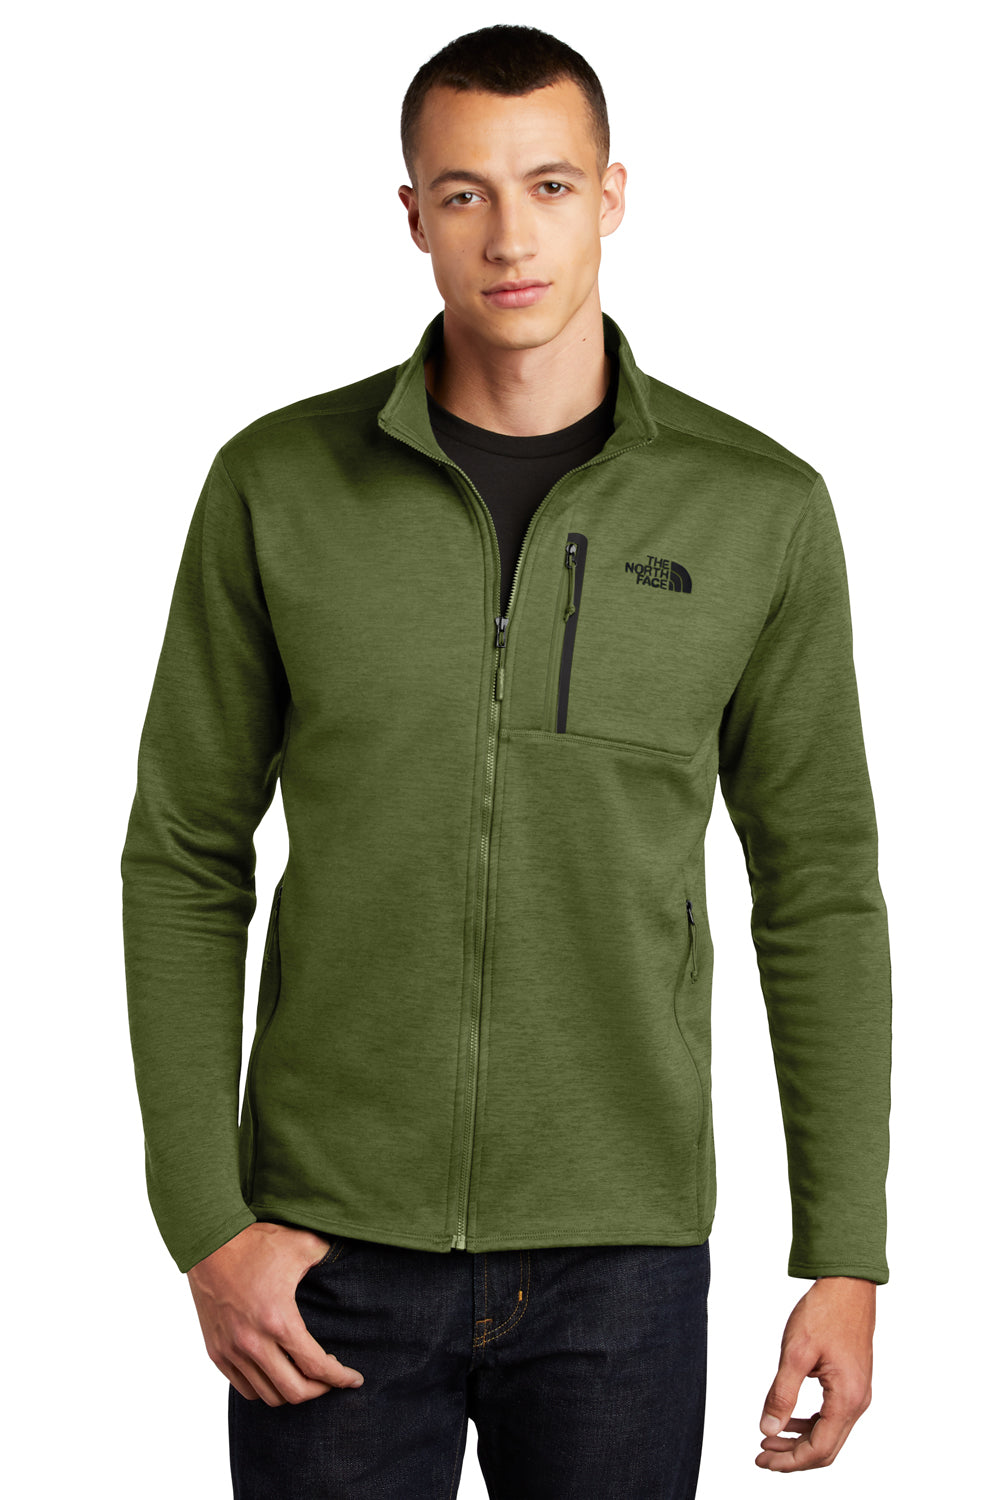 The North Face NF0A7V64 Mens Skyline Full Zip Fleece Jacket Heather Clover Green Front